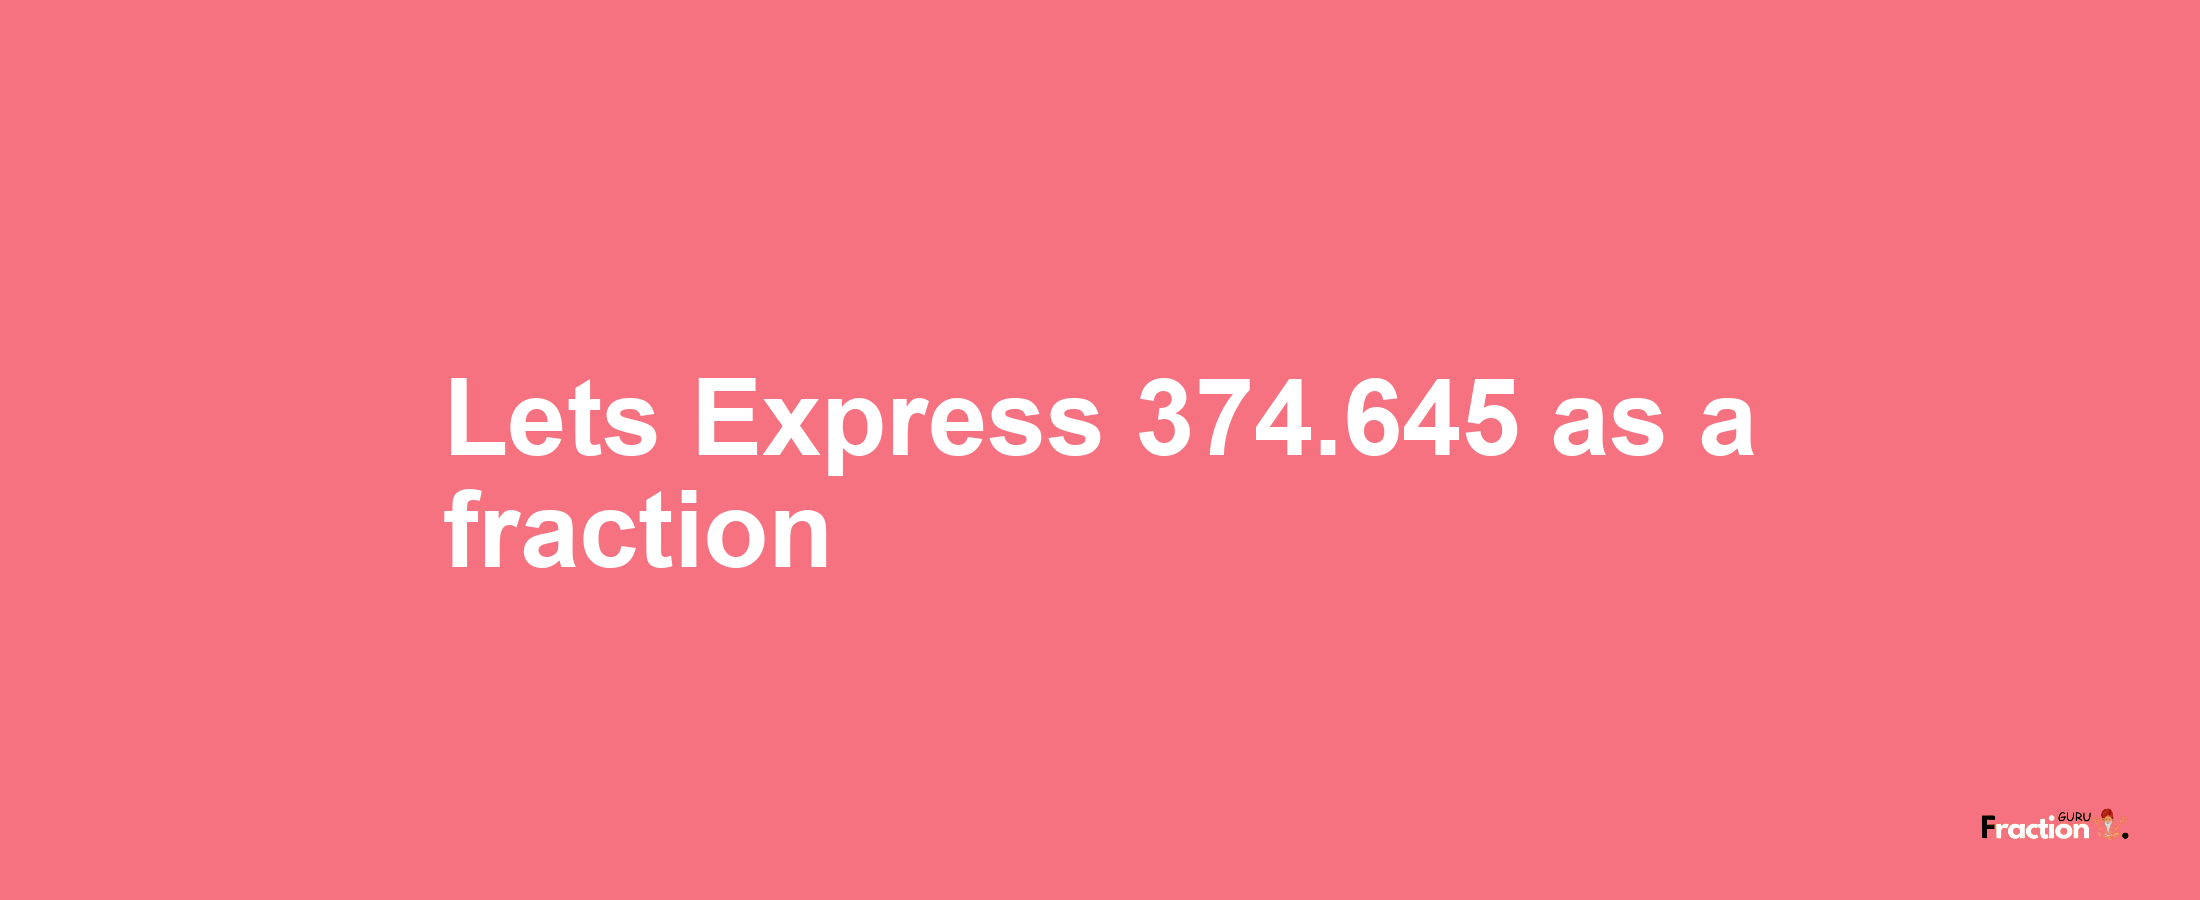 Lets Express 374.645 as afraction